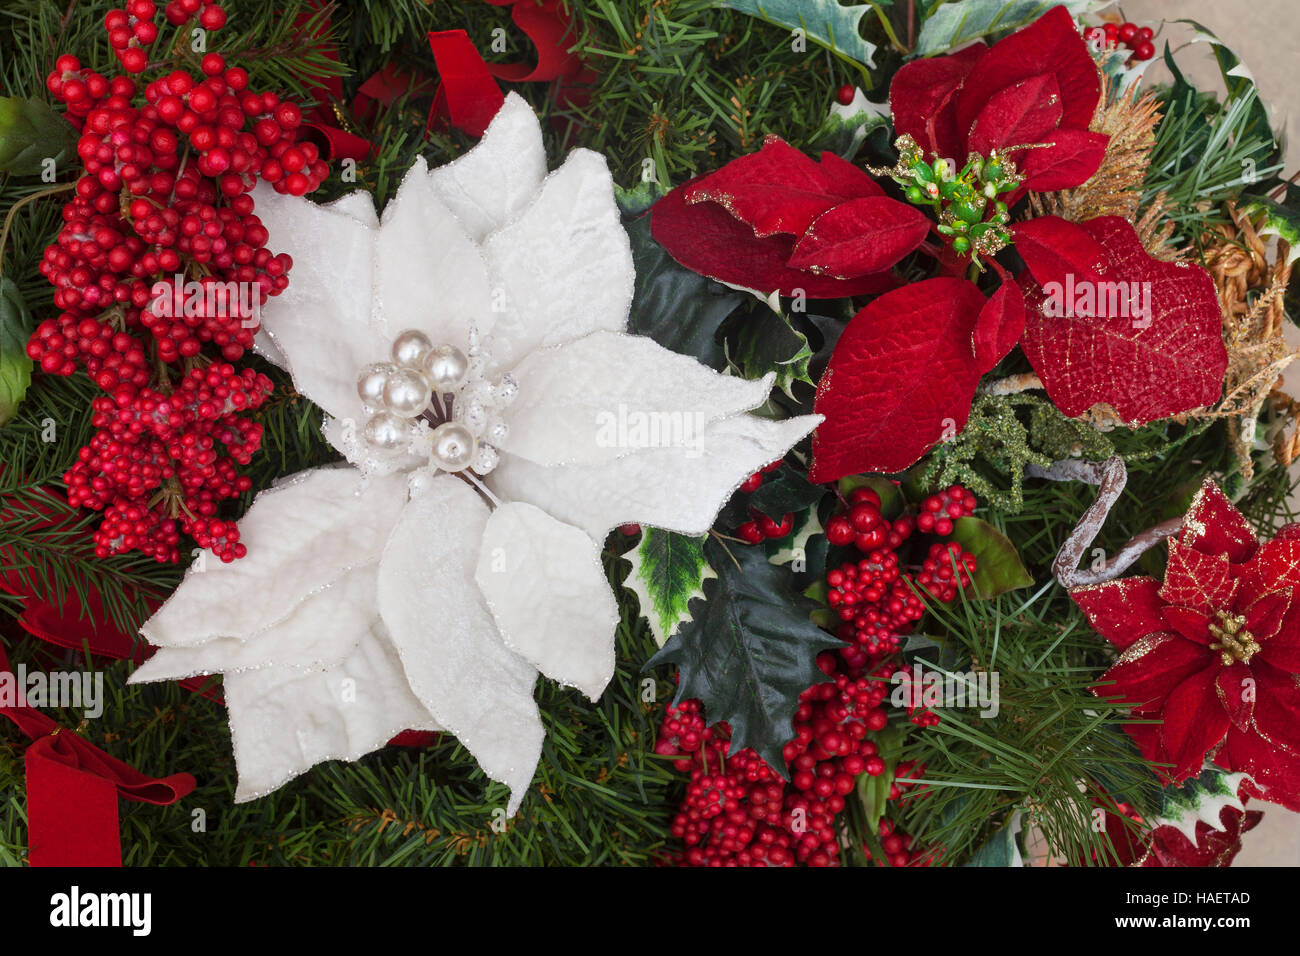 Christmas decorations in a box close-up Stock Photo